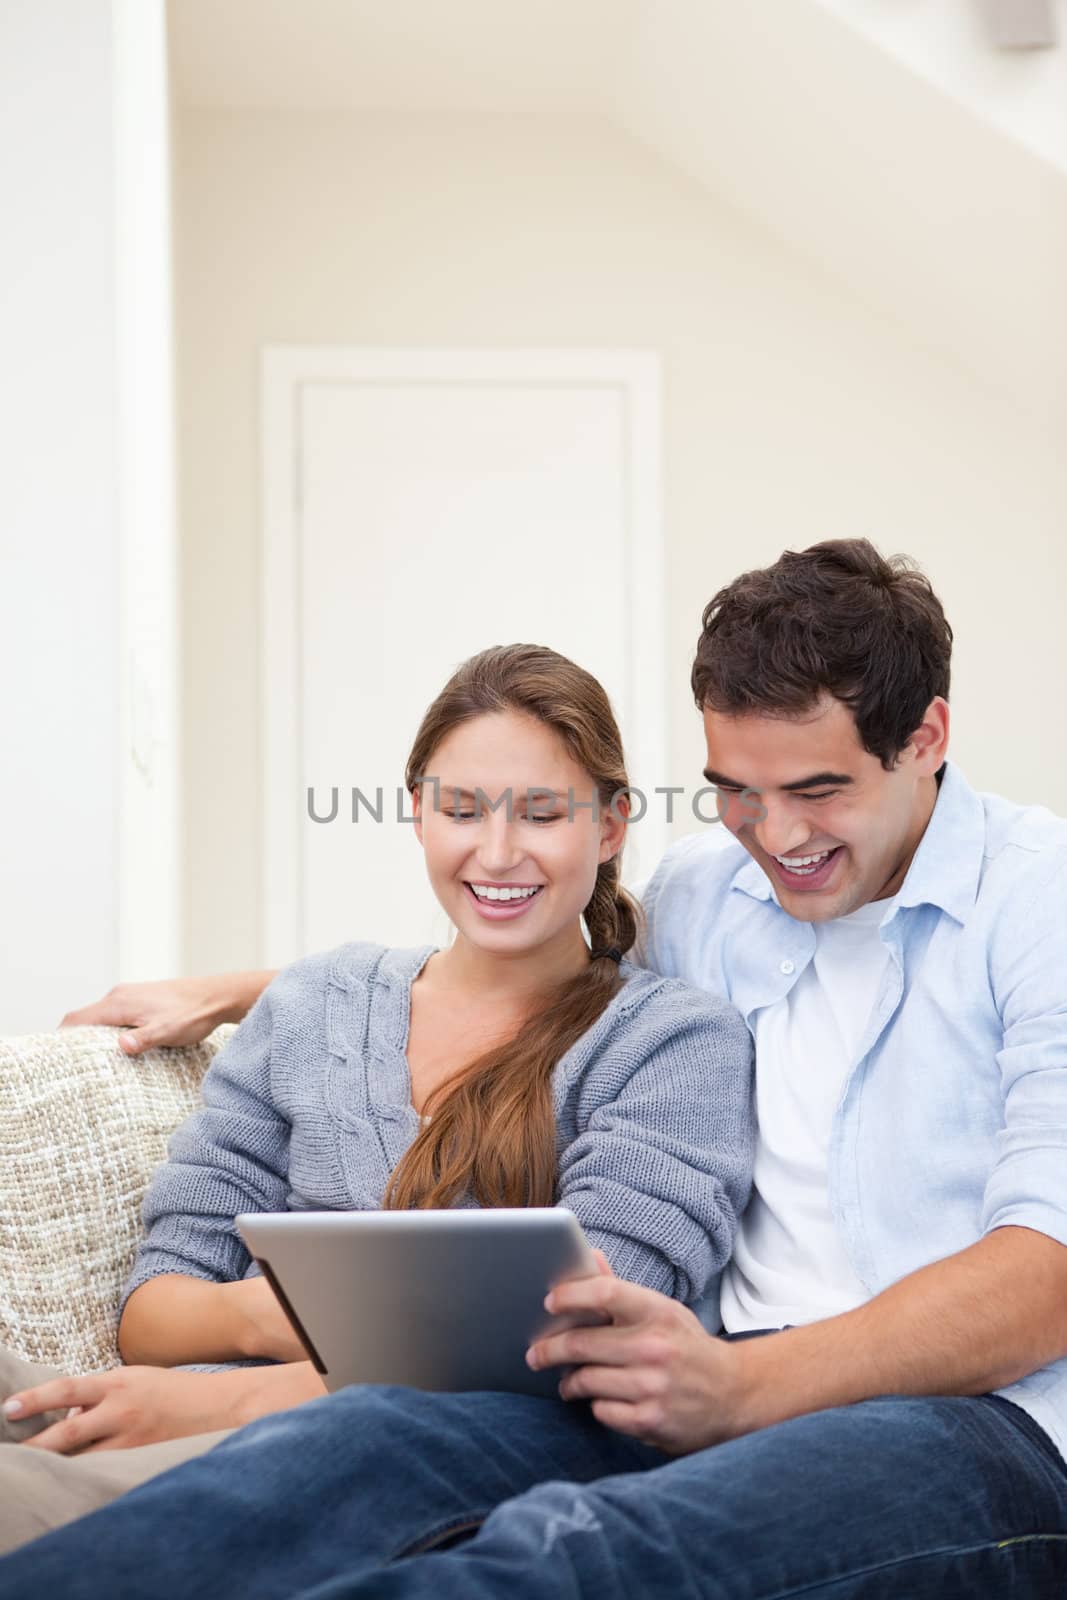 Couple laughing while holding a laptop by Wavebreakmedia